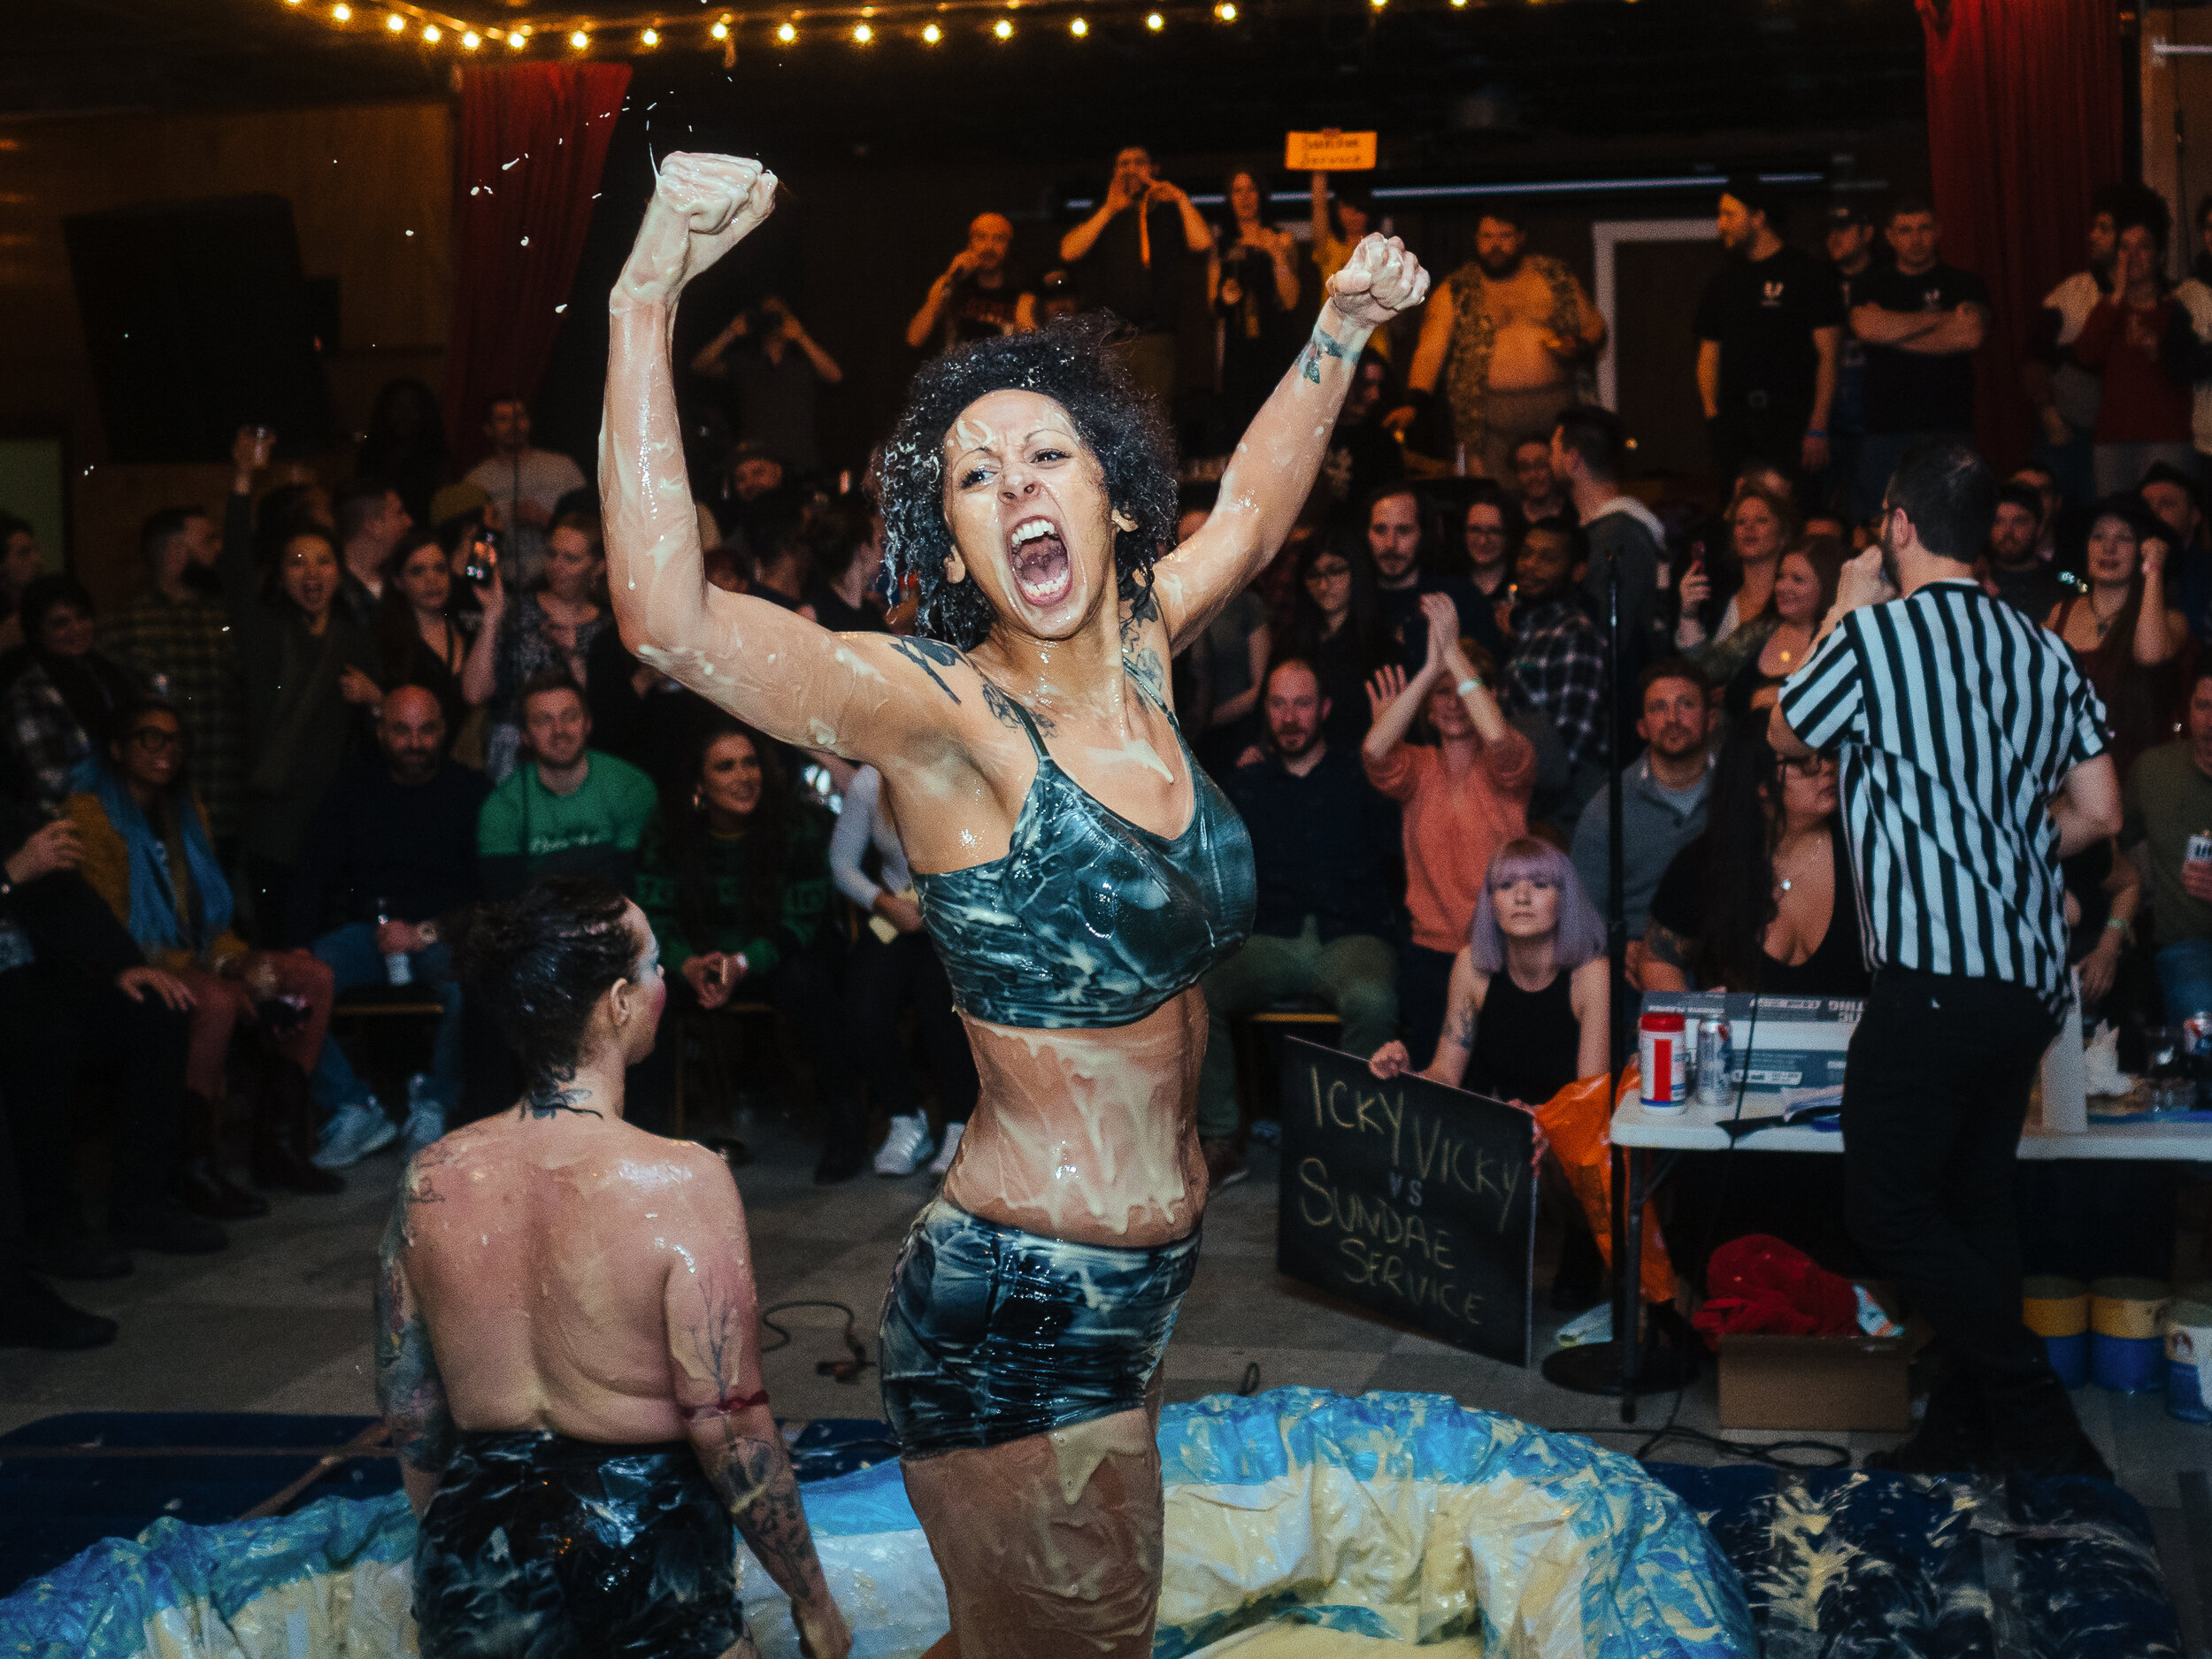  Alicia Lynn, also known as Sundae Service, celebrates after winning a match at the 10th anniversary of Pudding Wrestling Massacre at Spirit in Lawrenceville on Friday, Feb. 15, 2019. 